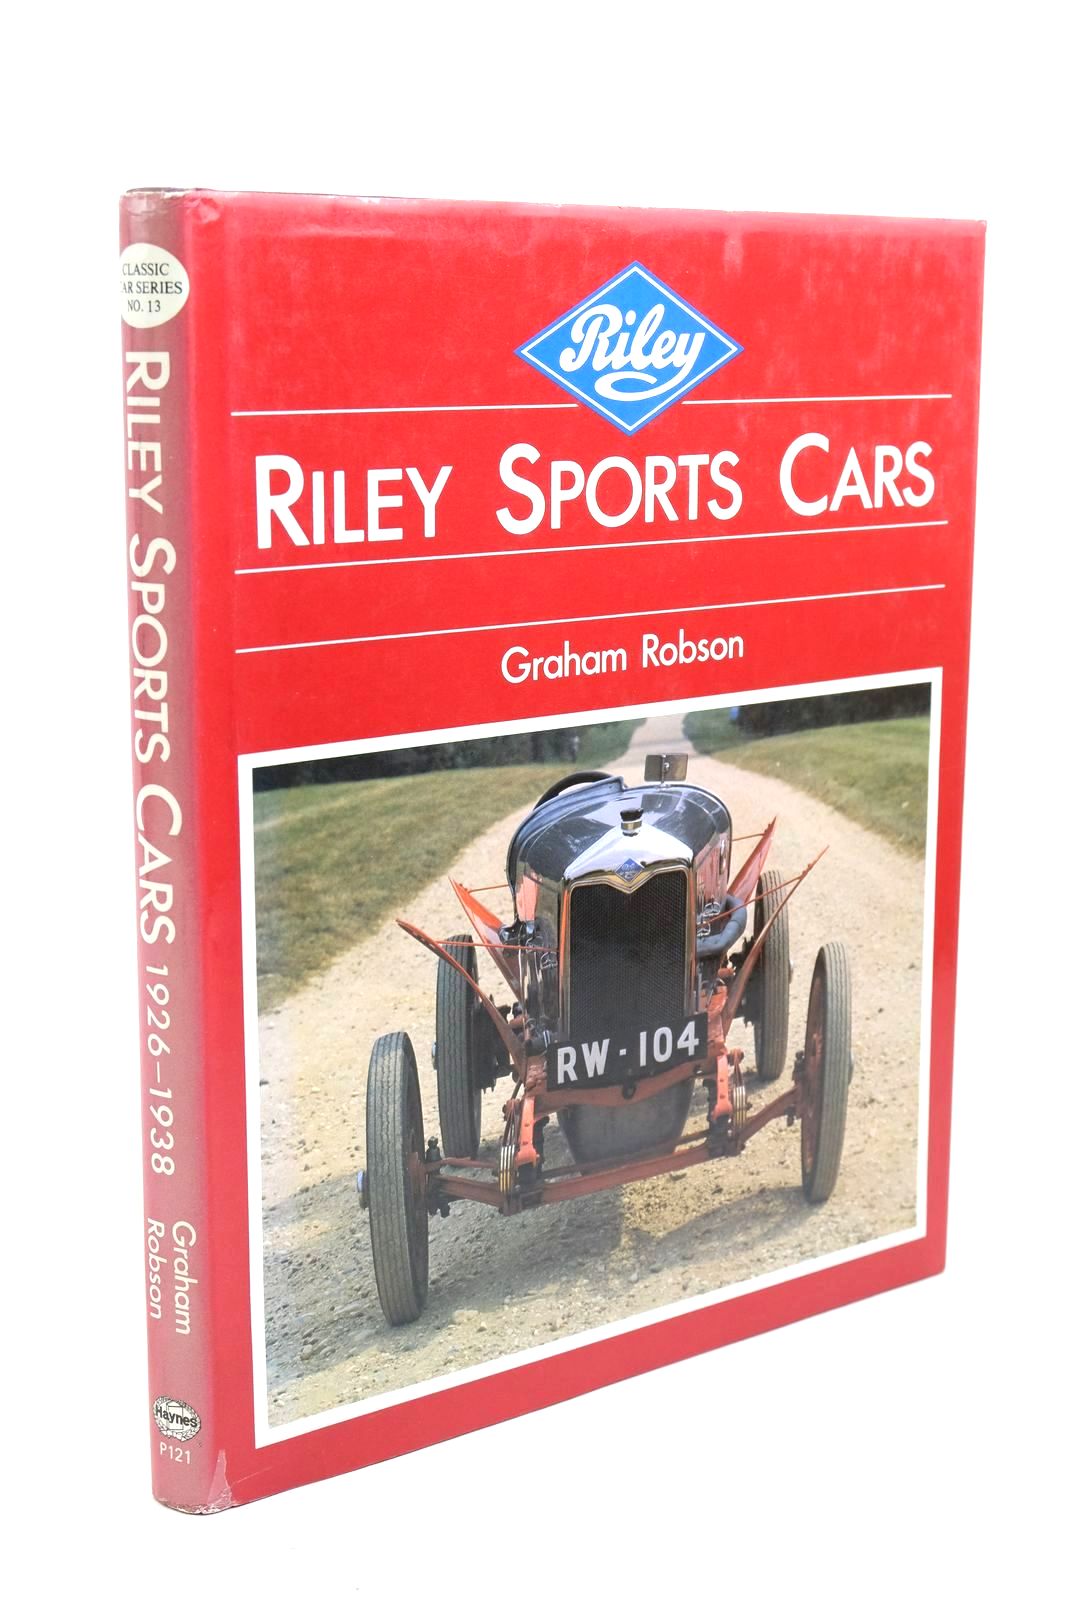 Photo of RILEY SPORTS CARS 1926-1938 written by Robson, Graham published by The Oxford Illustrated Press, Haynes (STOCK CODE: 1321240)  for sale by Stella & Rose's Books